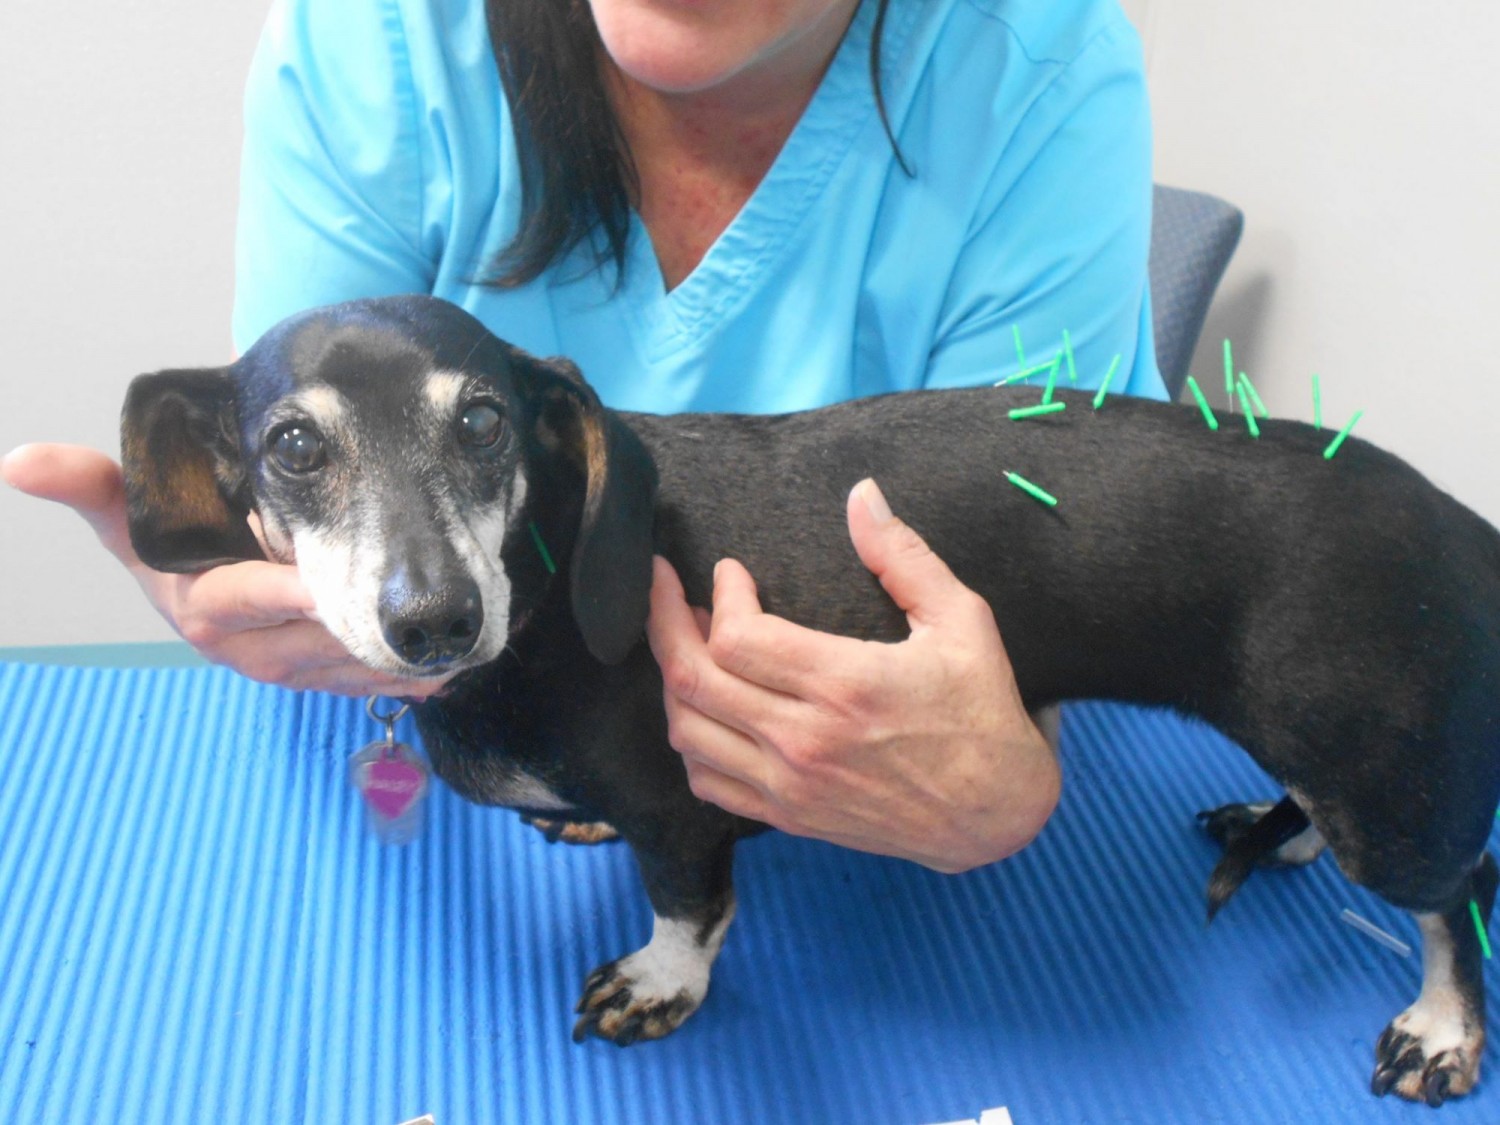 Dog getting Acupuncture